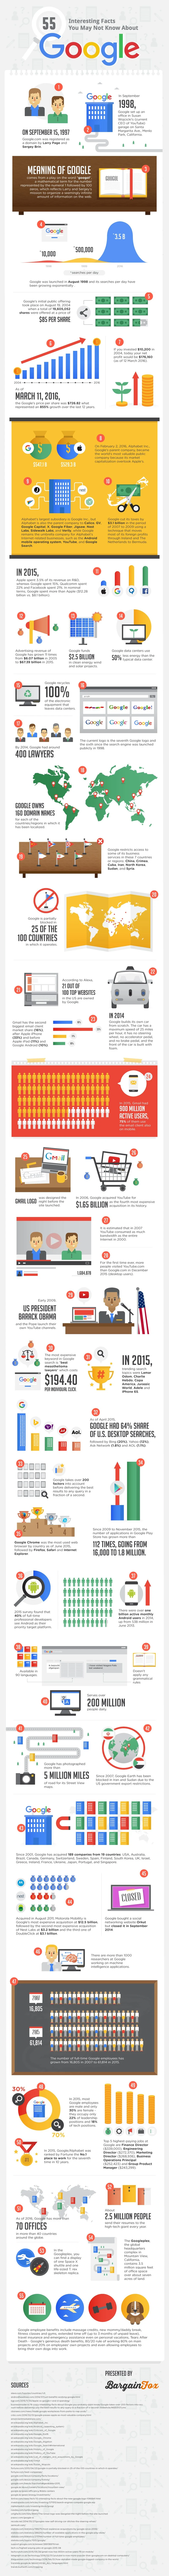 55 Interesting Facts You May Not Know About Google - #infographic